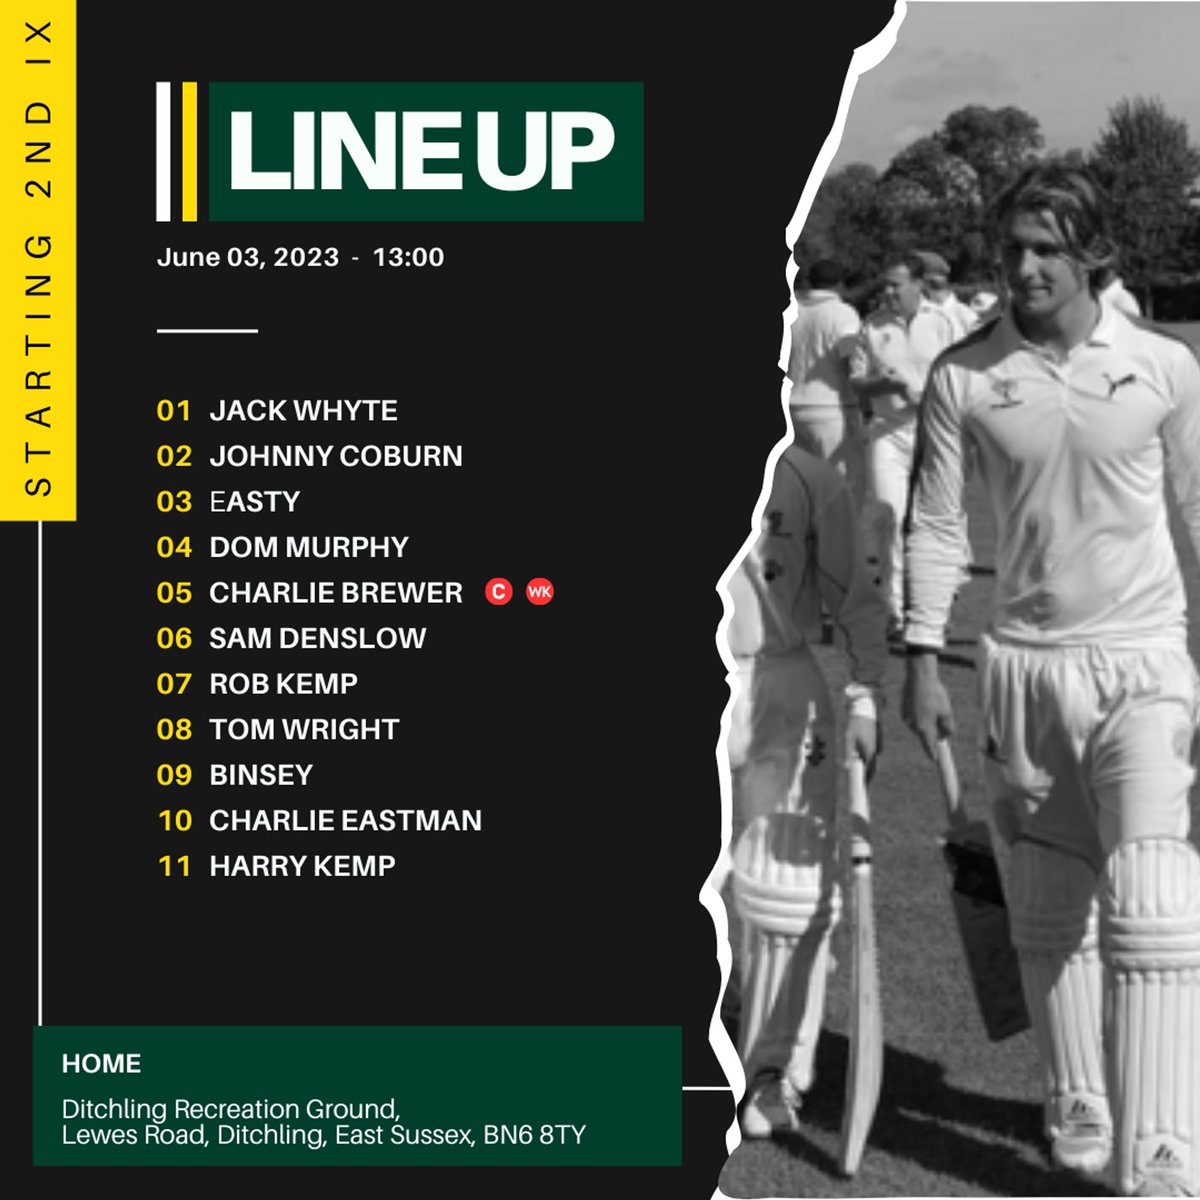 The games are coming thick and fast. This weekend we have two more matches with one at home to Haywards Heath with our 2s.

1st XI
🆚 Edenbridge CC
⏰ 13:00
📍 Edenbridge Blossoms Park

2nd XI
🆚 Haywards Heath CC
⏰ 13:00
📍 Ditchling Recreation Ground